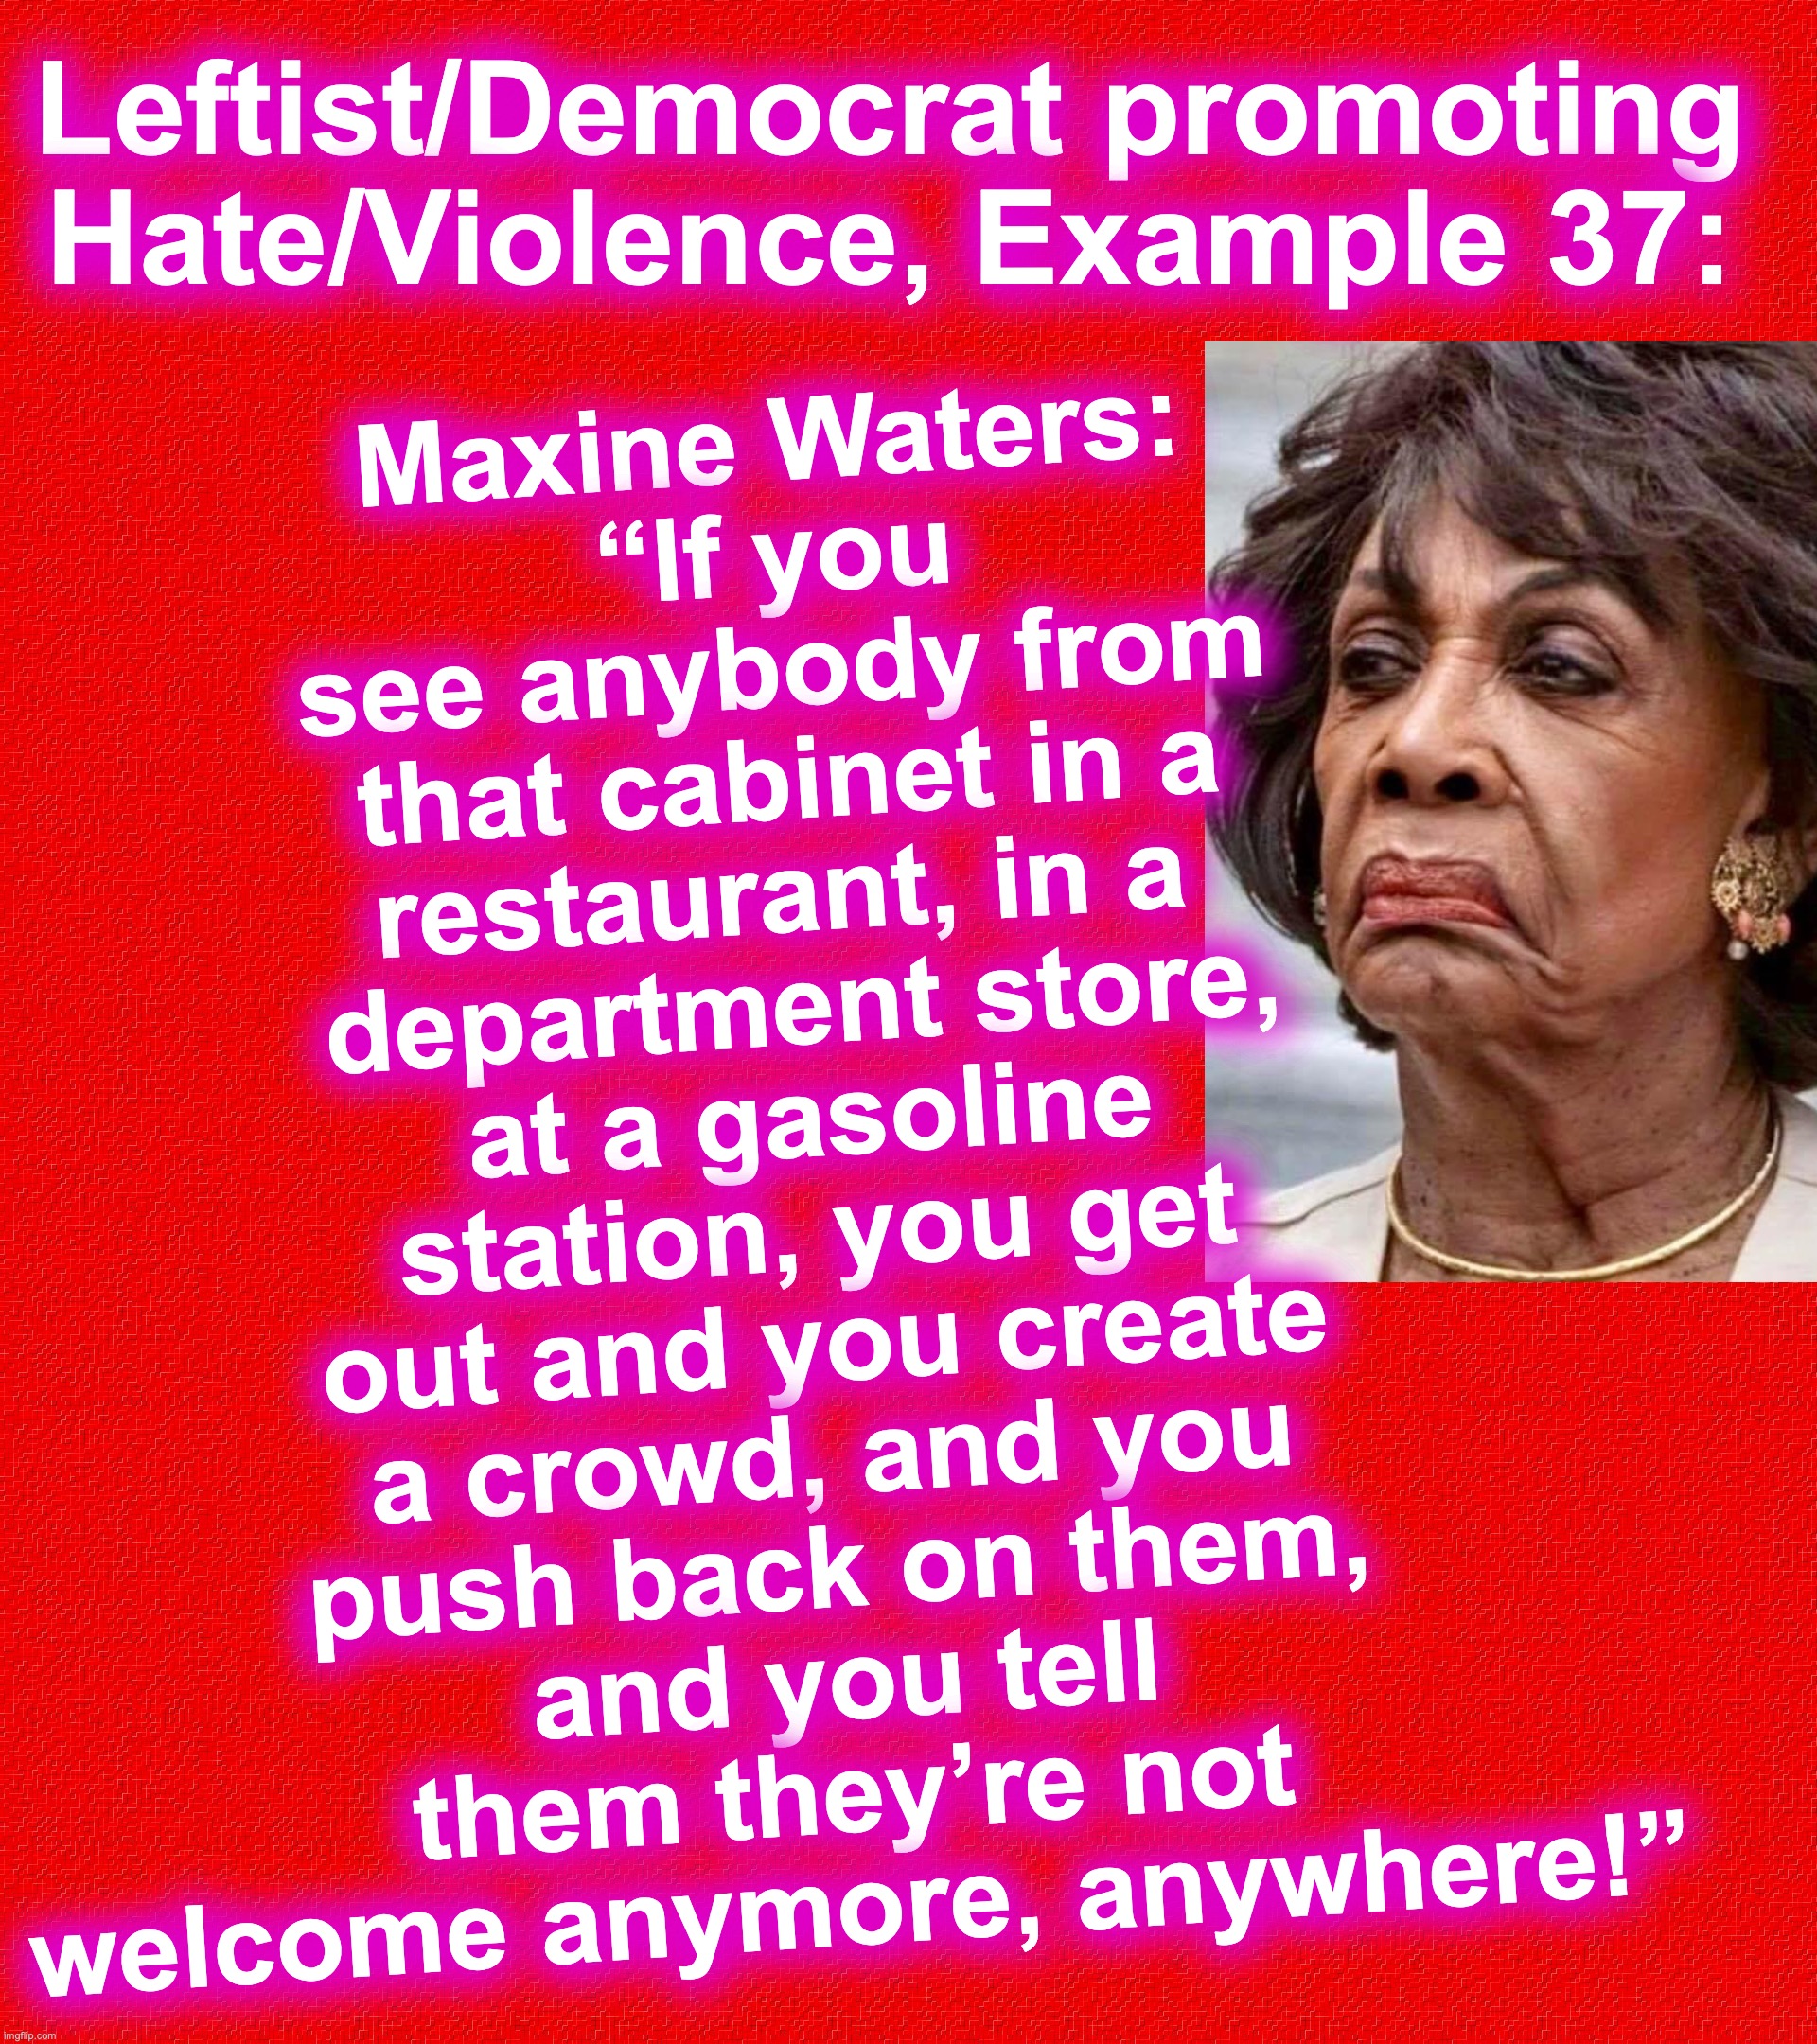 I mean, since they want to point out who's promoting violence | Maxine Waters:
“If you see anybody from that cabinet in a restaurant, in a 
department store, at a gasoline station, you get out and you create a crowd, and you push back on them, and you tell them they’re not welcome anymore, anywhere!”; Leftist/Democrat promoting Hate/Violence, Example 37: | image tagged in democrats,leftists,haters,violence | made w/ Imgflip meme maker